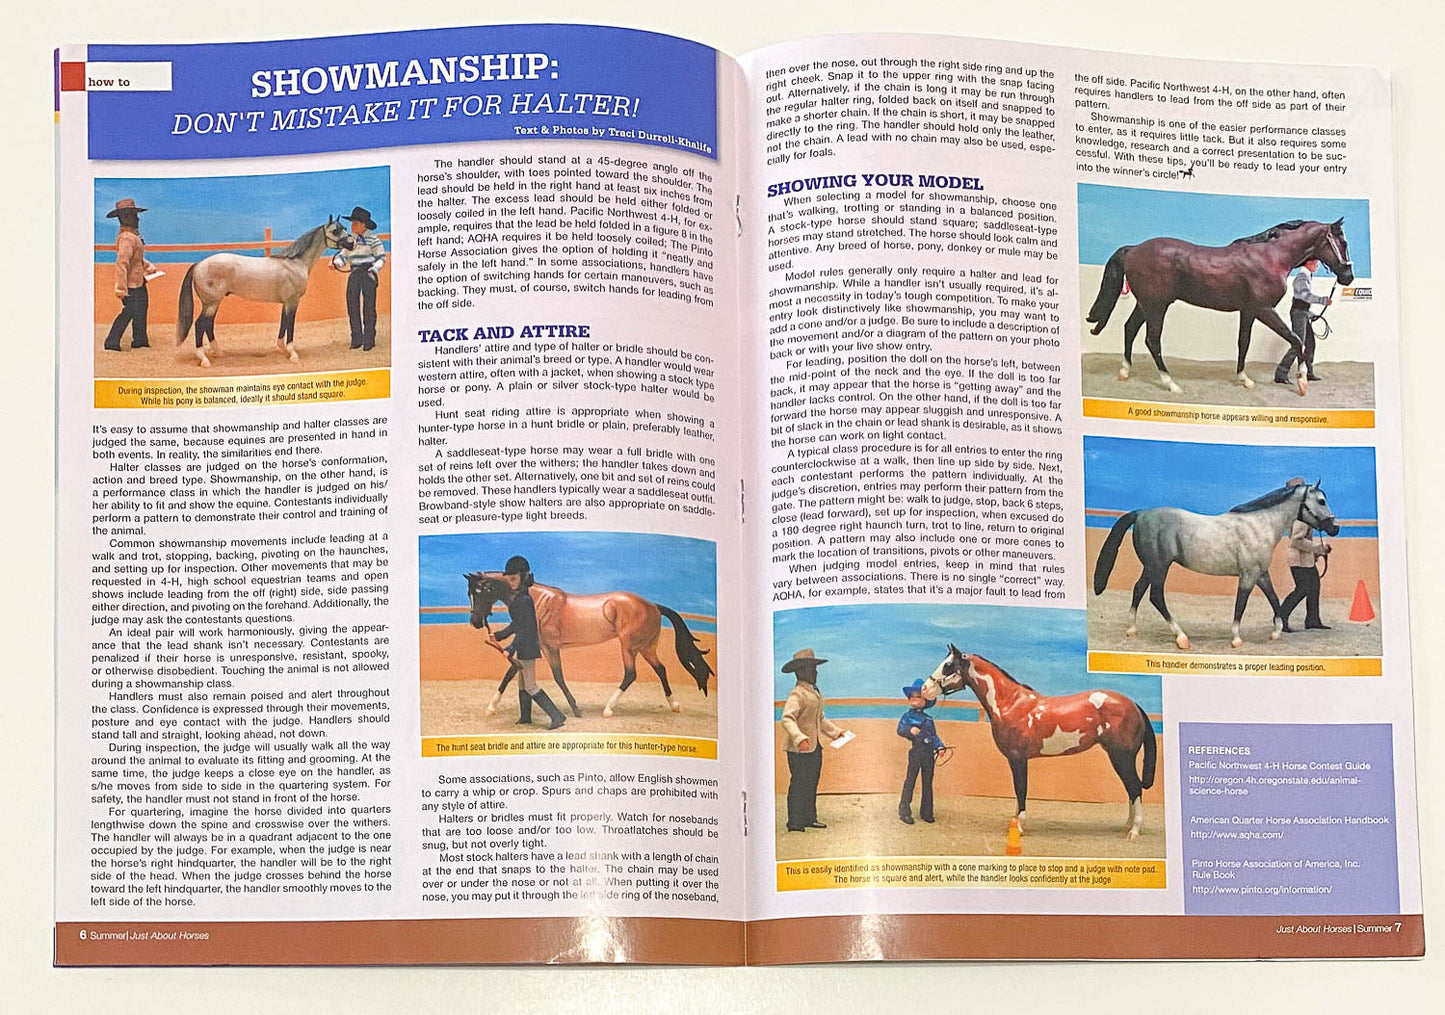 Just About Horses Magazine Vol. 38, No. 3, 2011 Summer